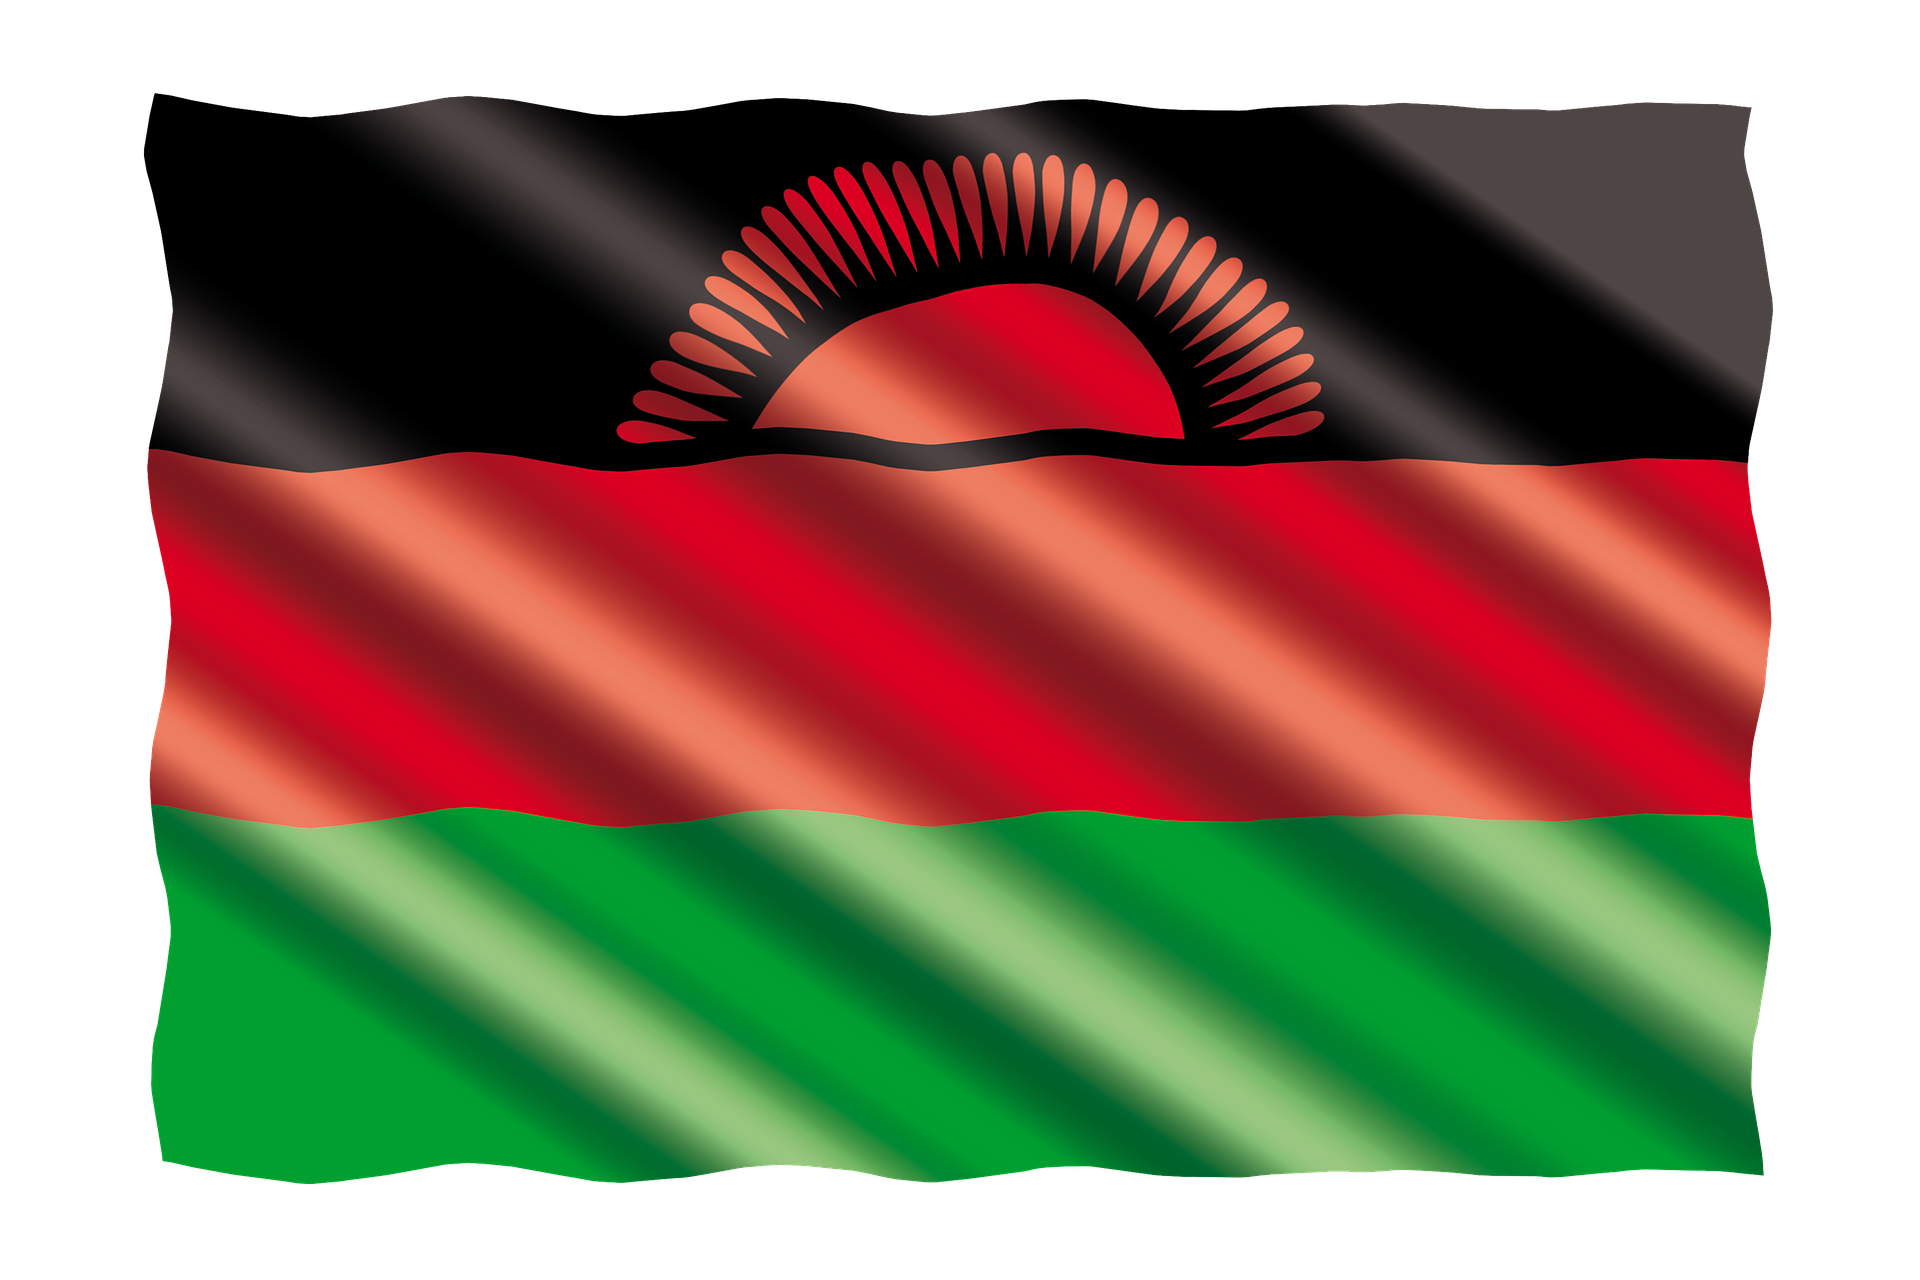 in-malawi-groups-propose-rotational-presidency-to-combat-regional